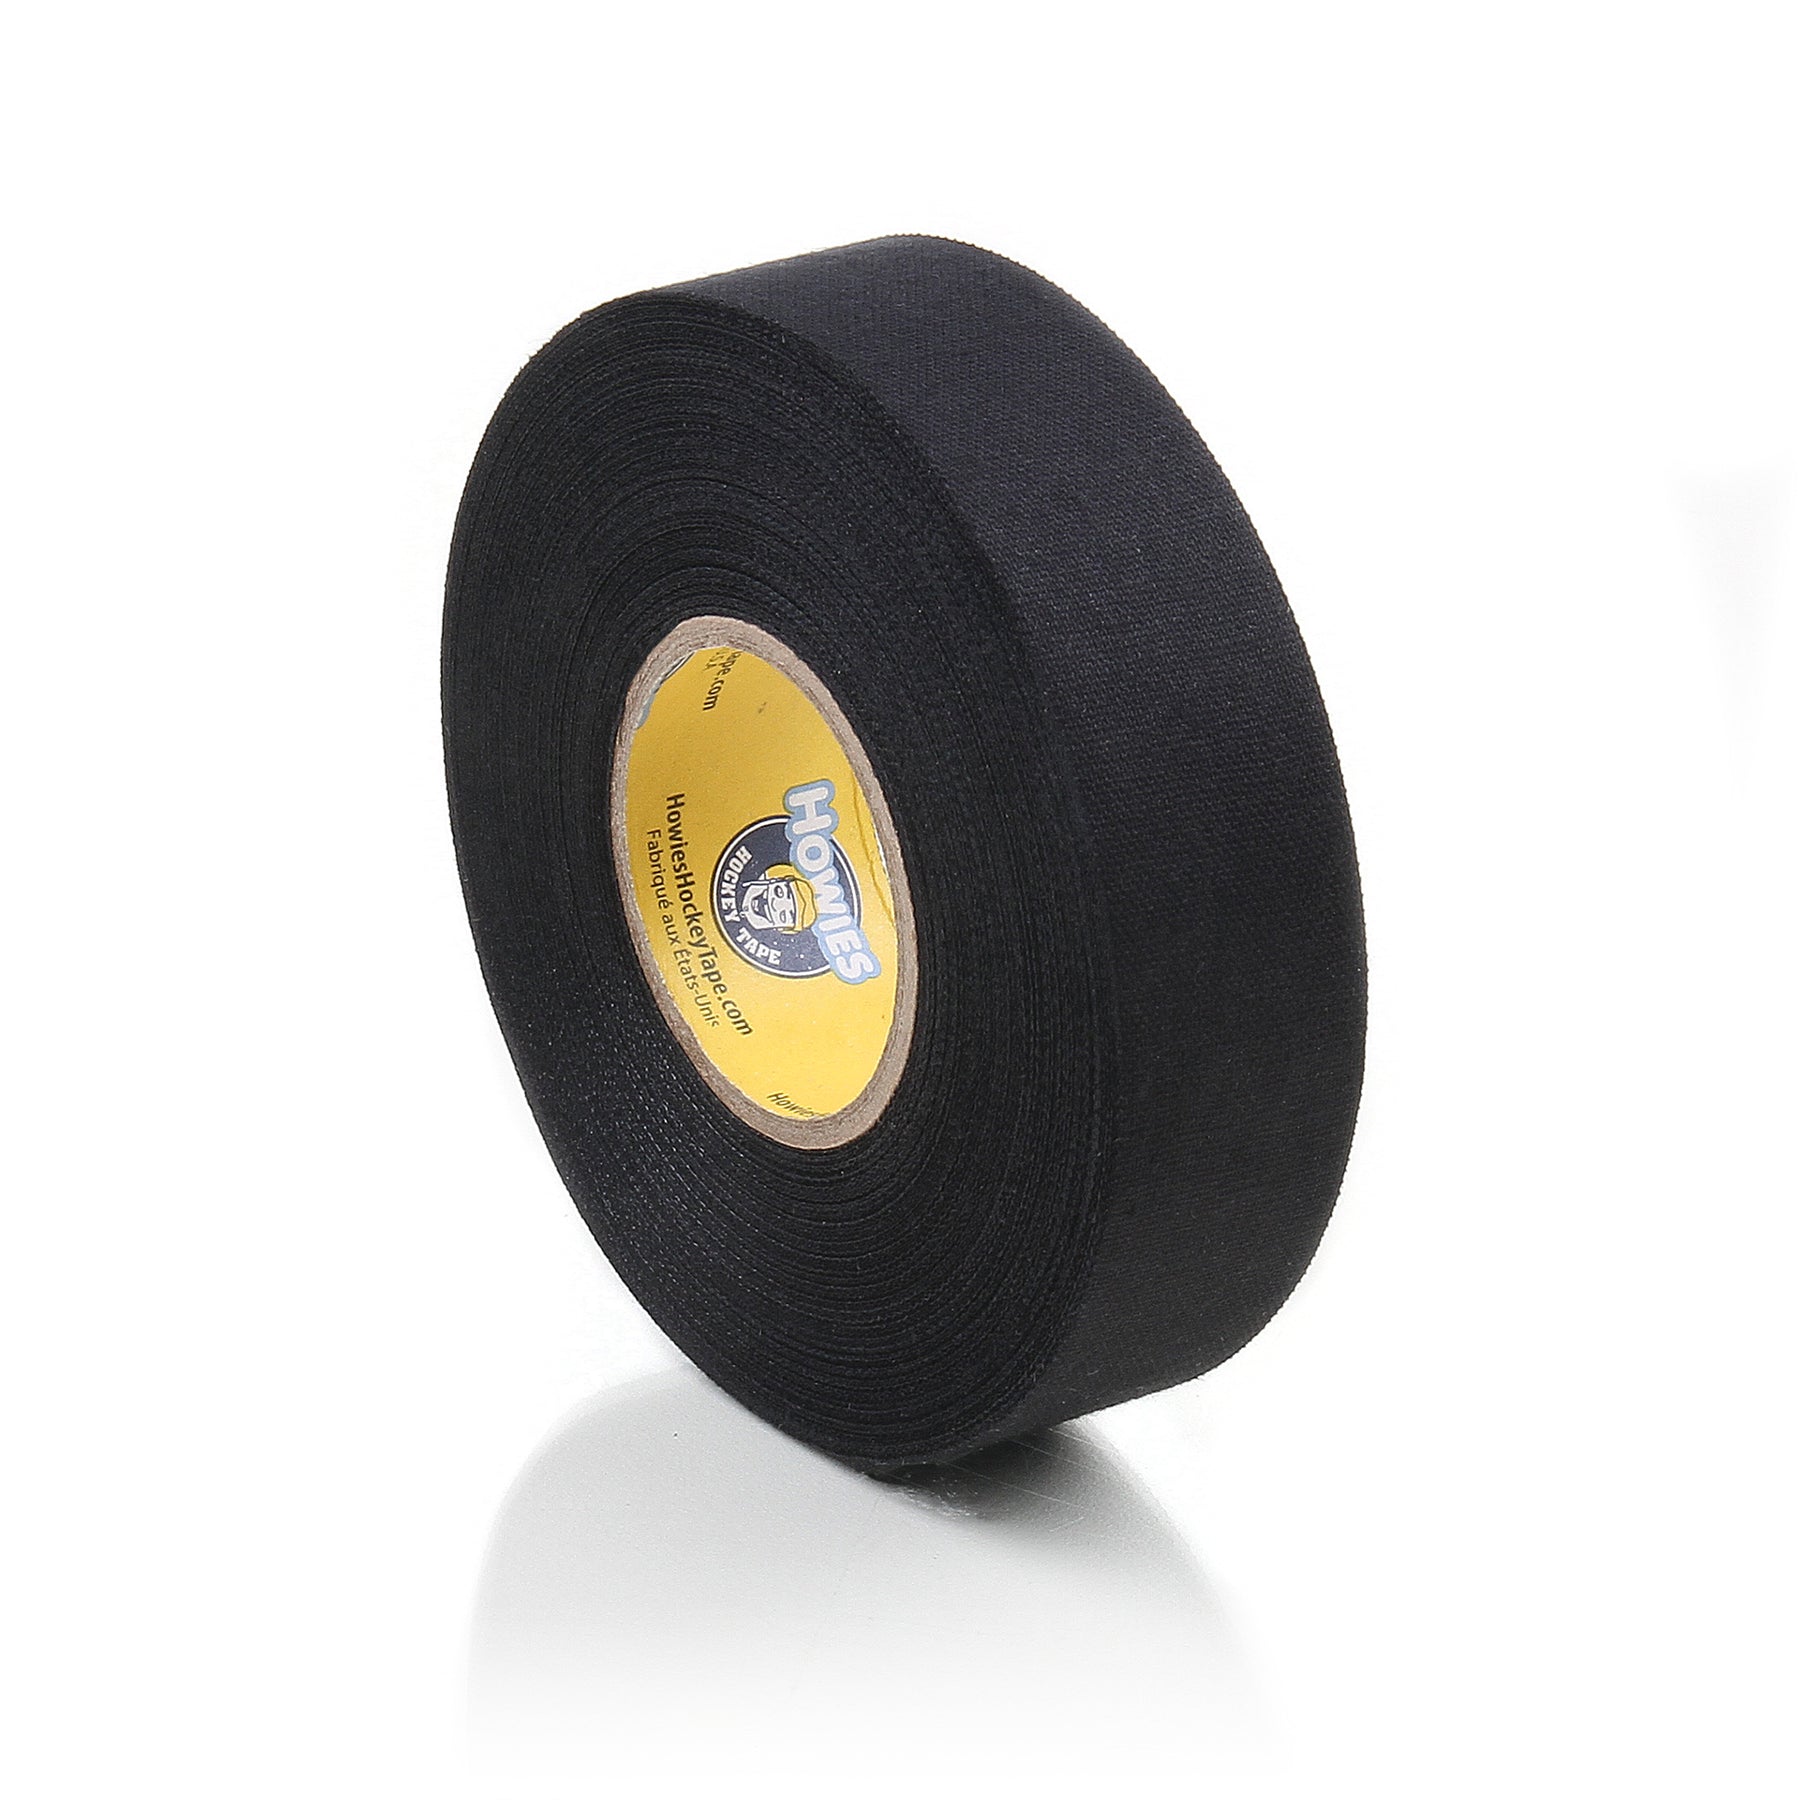  zechy Grip Tape - Hockey, Baseball, Lacrosse, Any Other Sports  requiring a Solid Grip - 2 inch by 15 feet (Black)(3 Pack) : Sports &  Outdoors